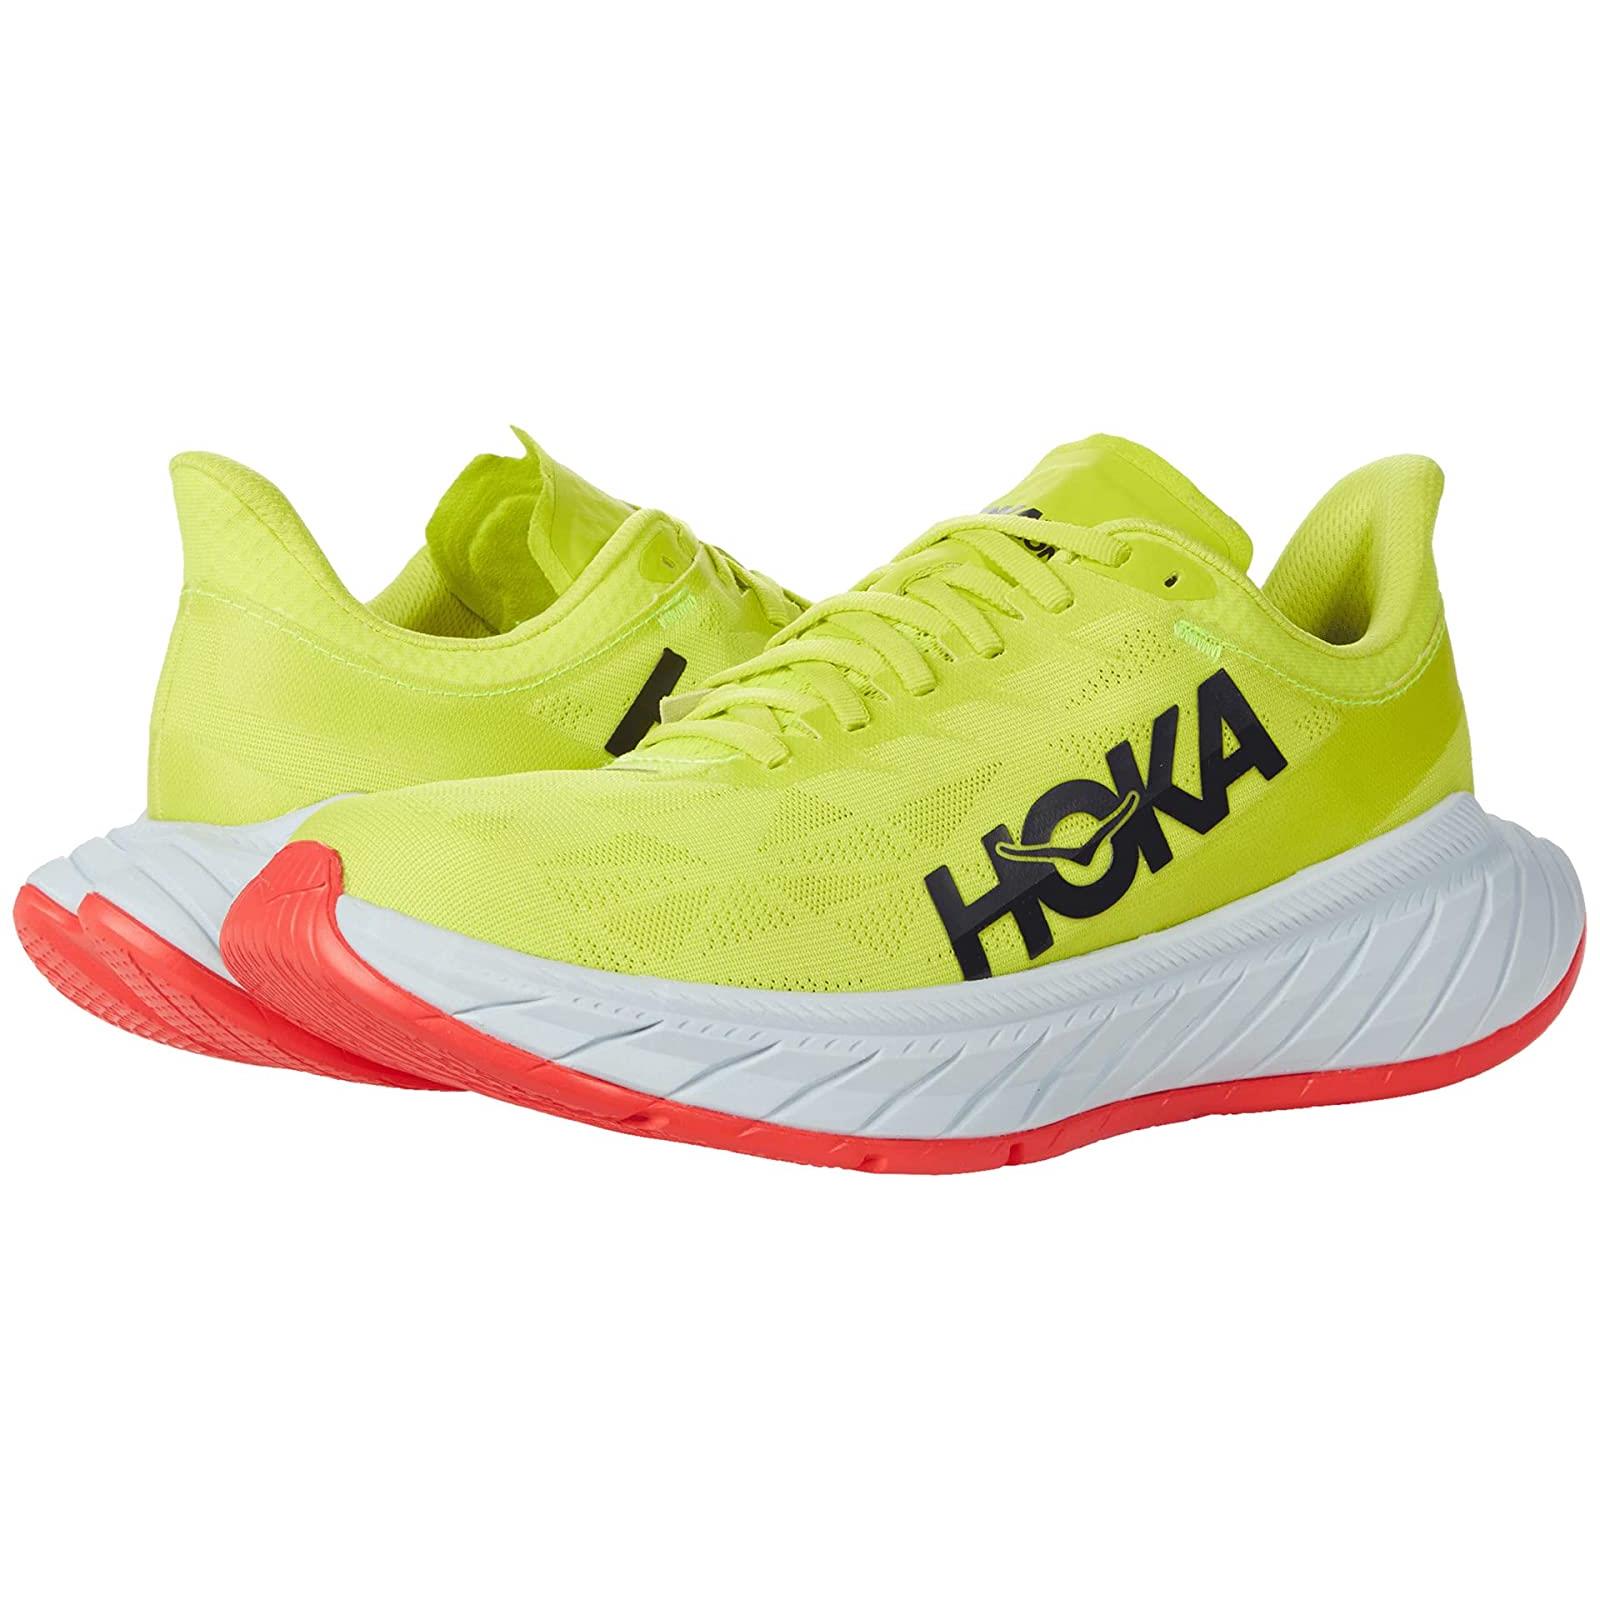 Man`s Sneakers Athletic Shoes Hoka One One Carbon X 2 Evening Primrose/Fiesta